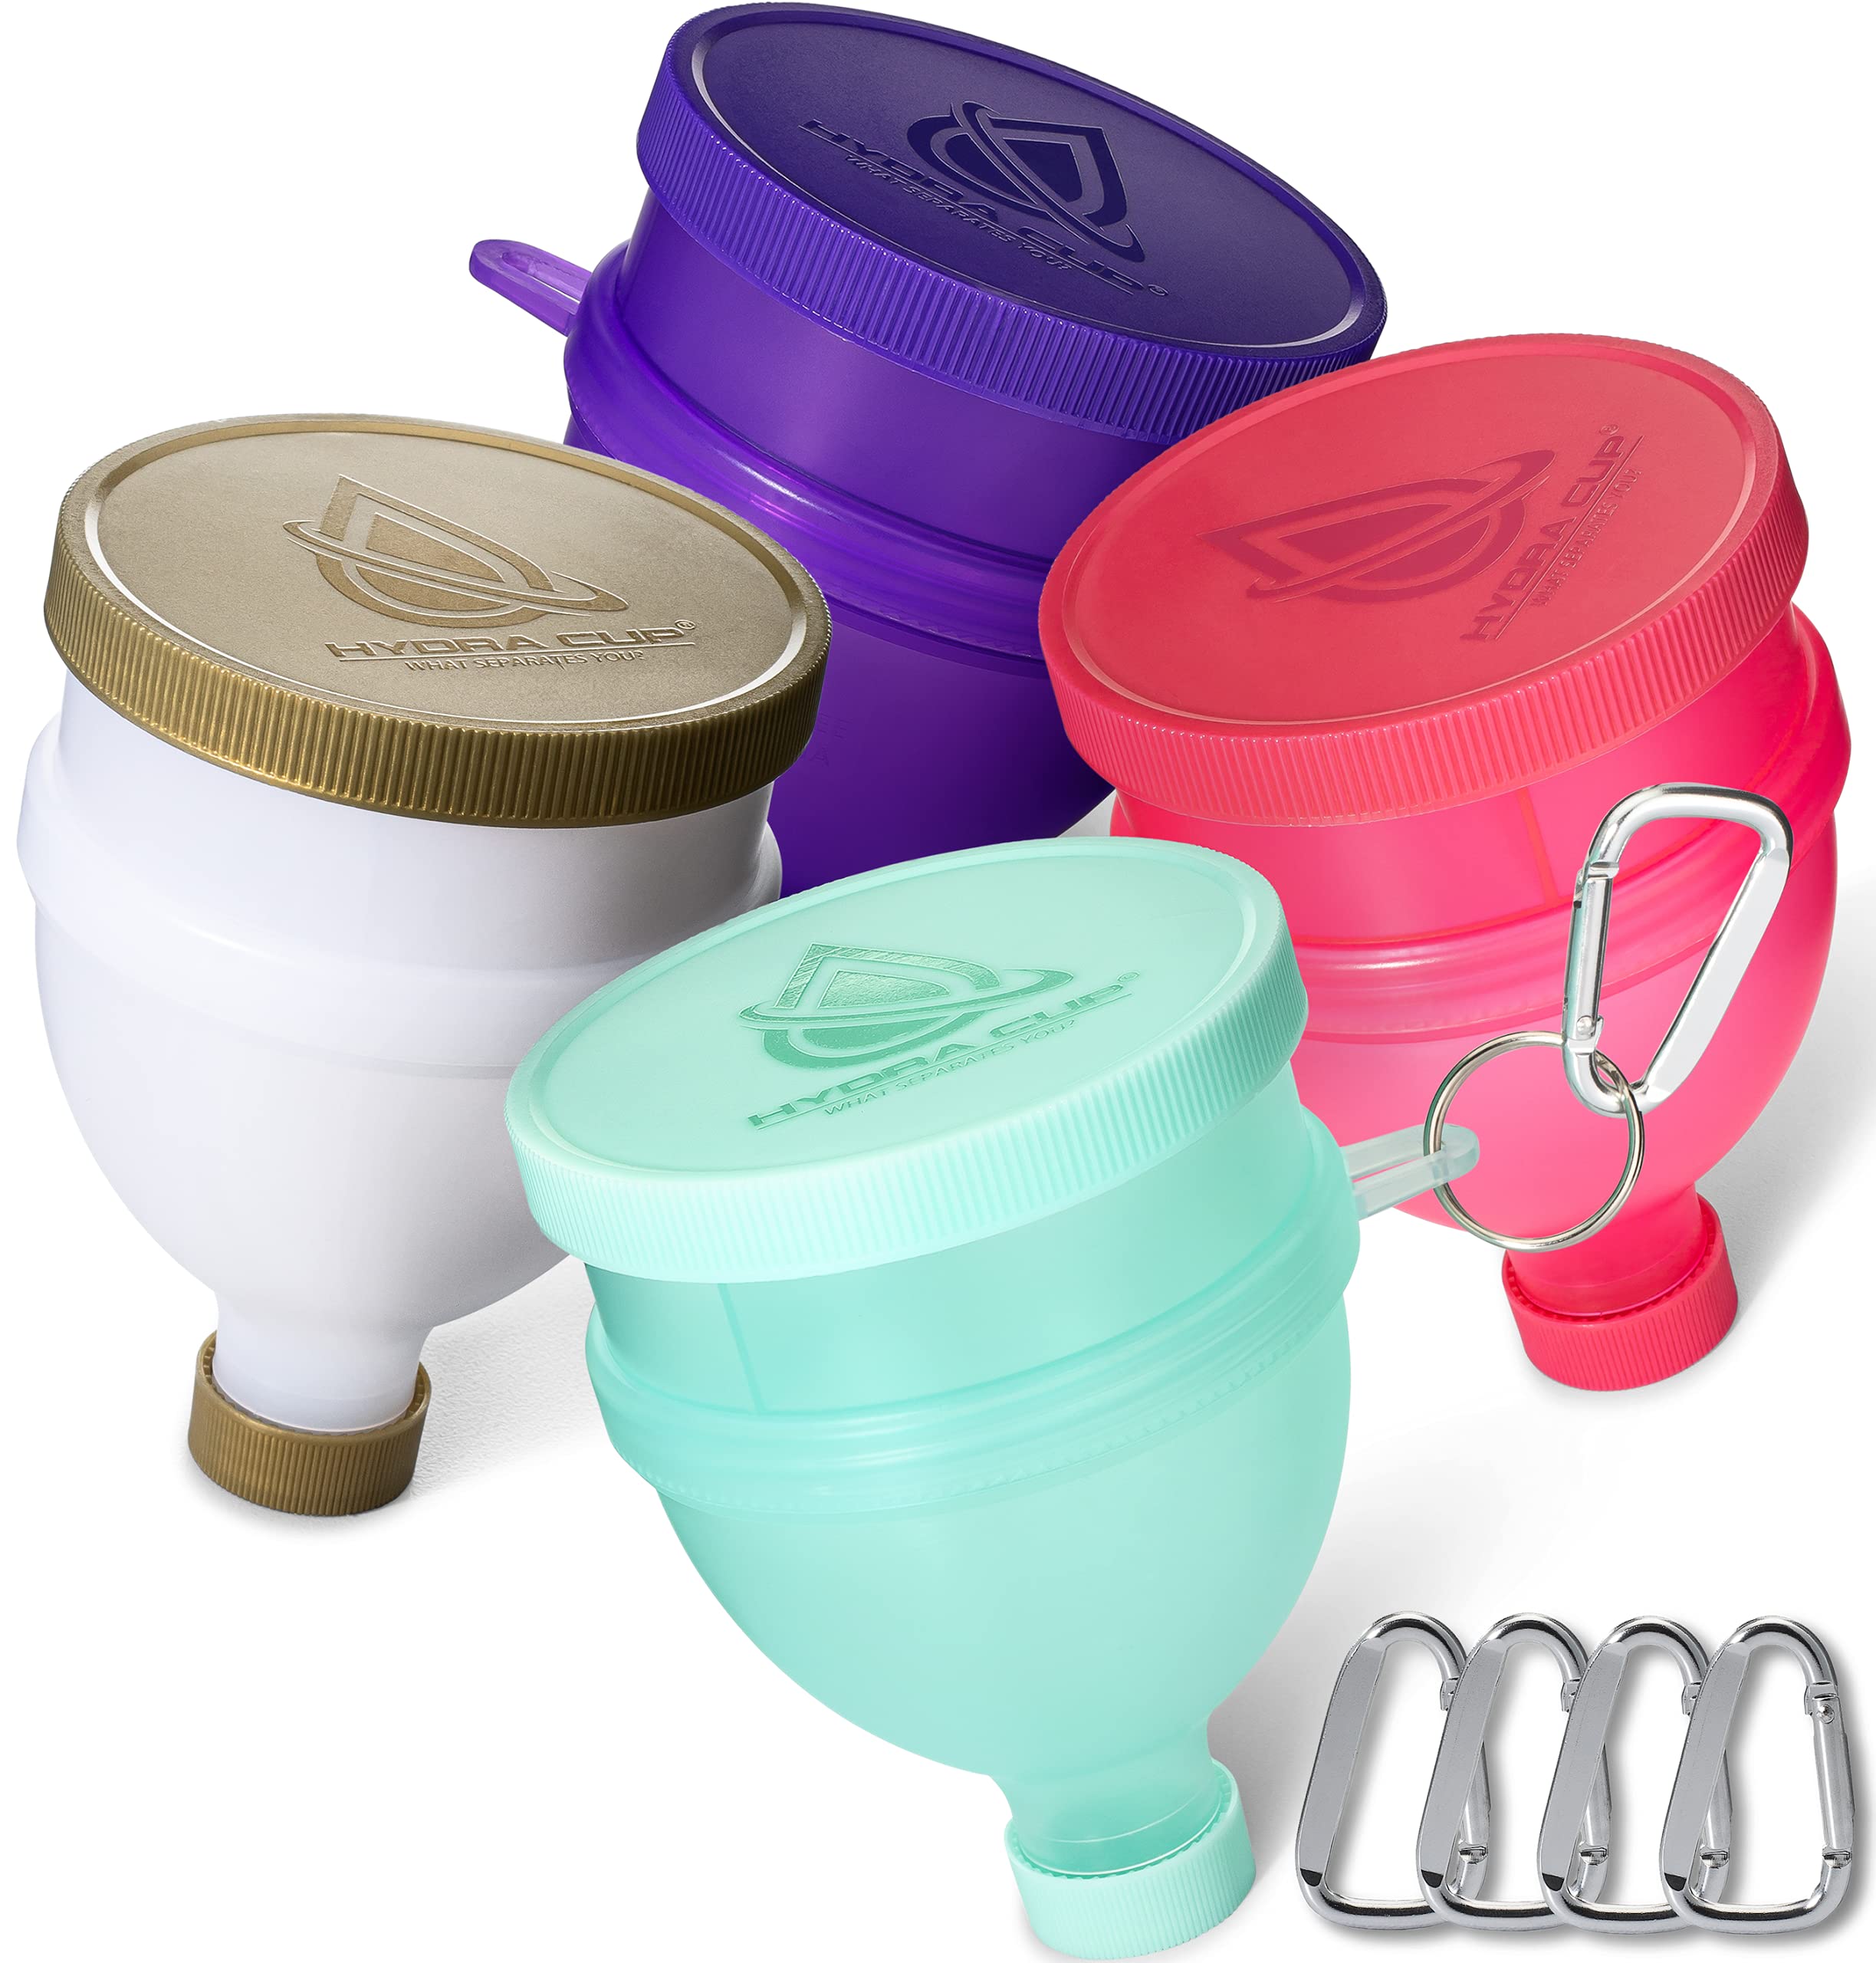 Hydra Cup [4 PACK] - Protein Powder Funnel w/ three compartments, pill &  supplement storage container & dispenser, pair w/ shaker bottle on the go  for pre/post workout (Purple/Pink/White/Gold/Green) Purple, Pink, White/Gol…